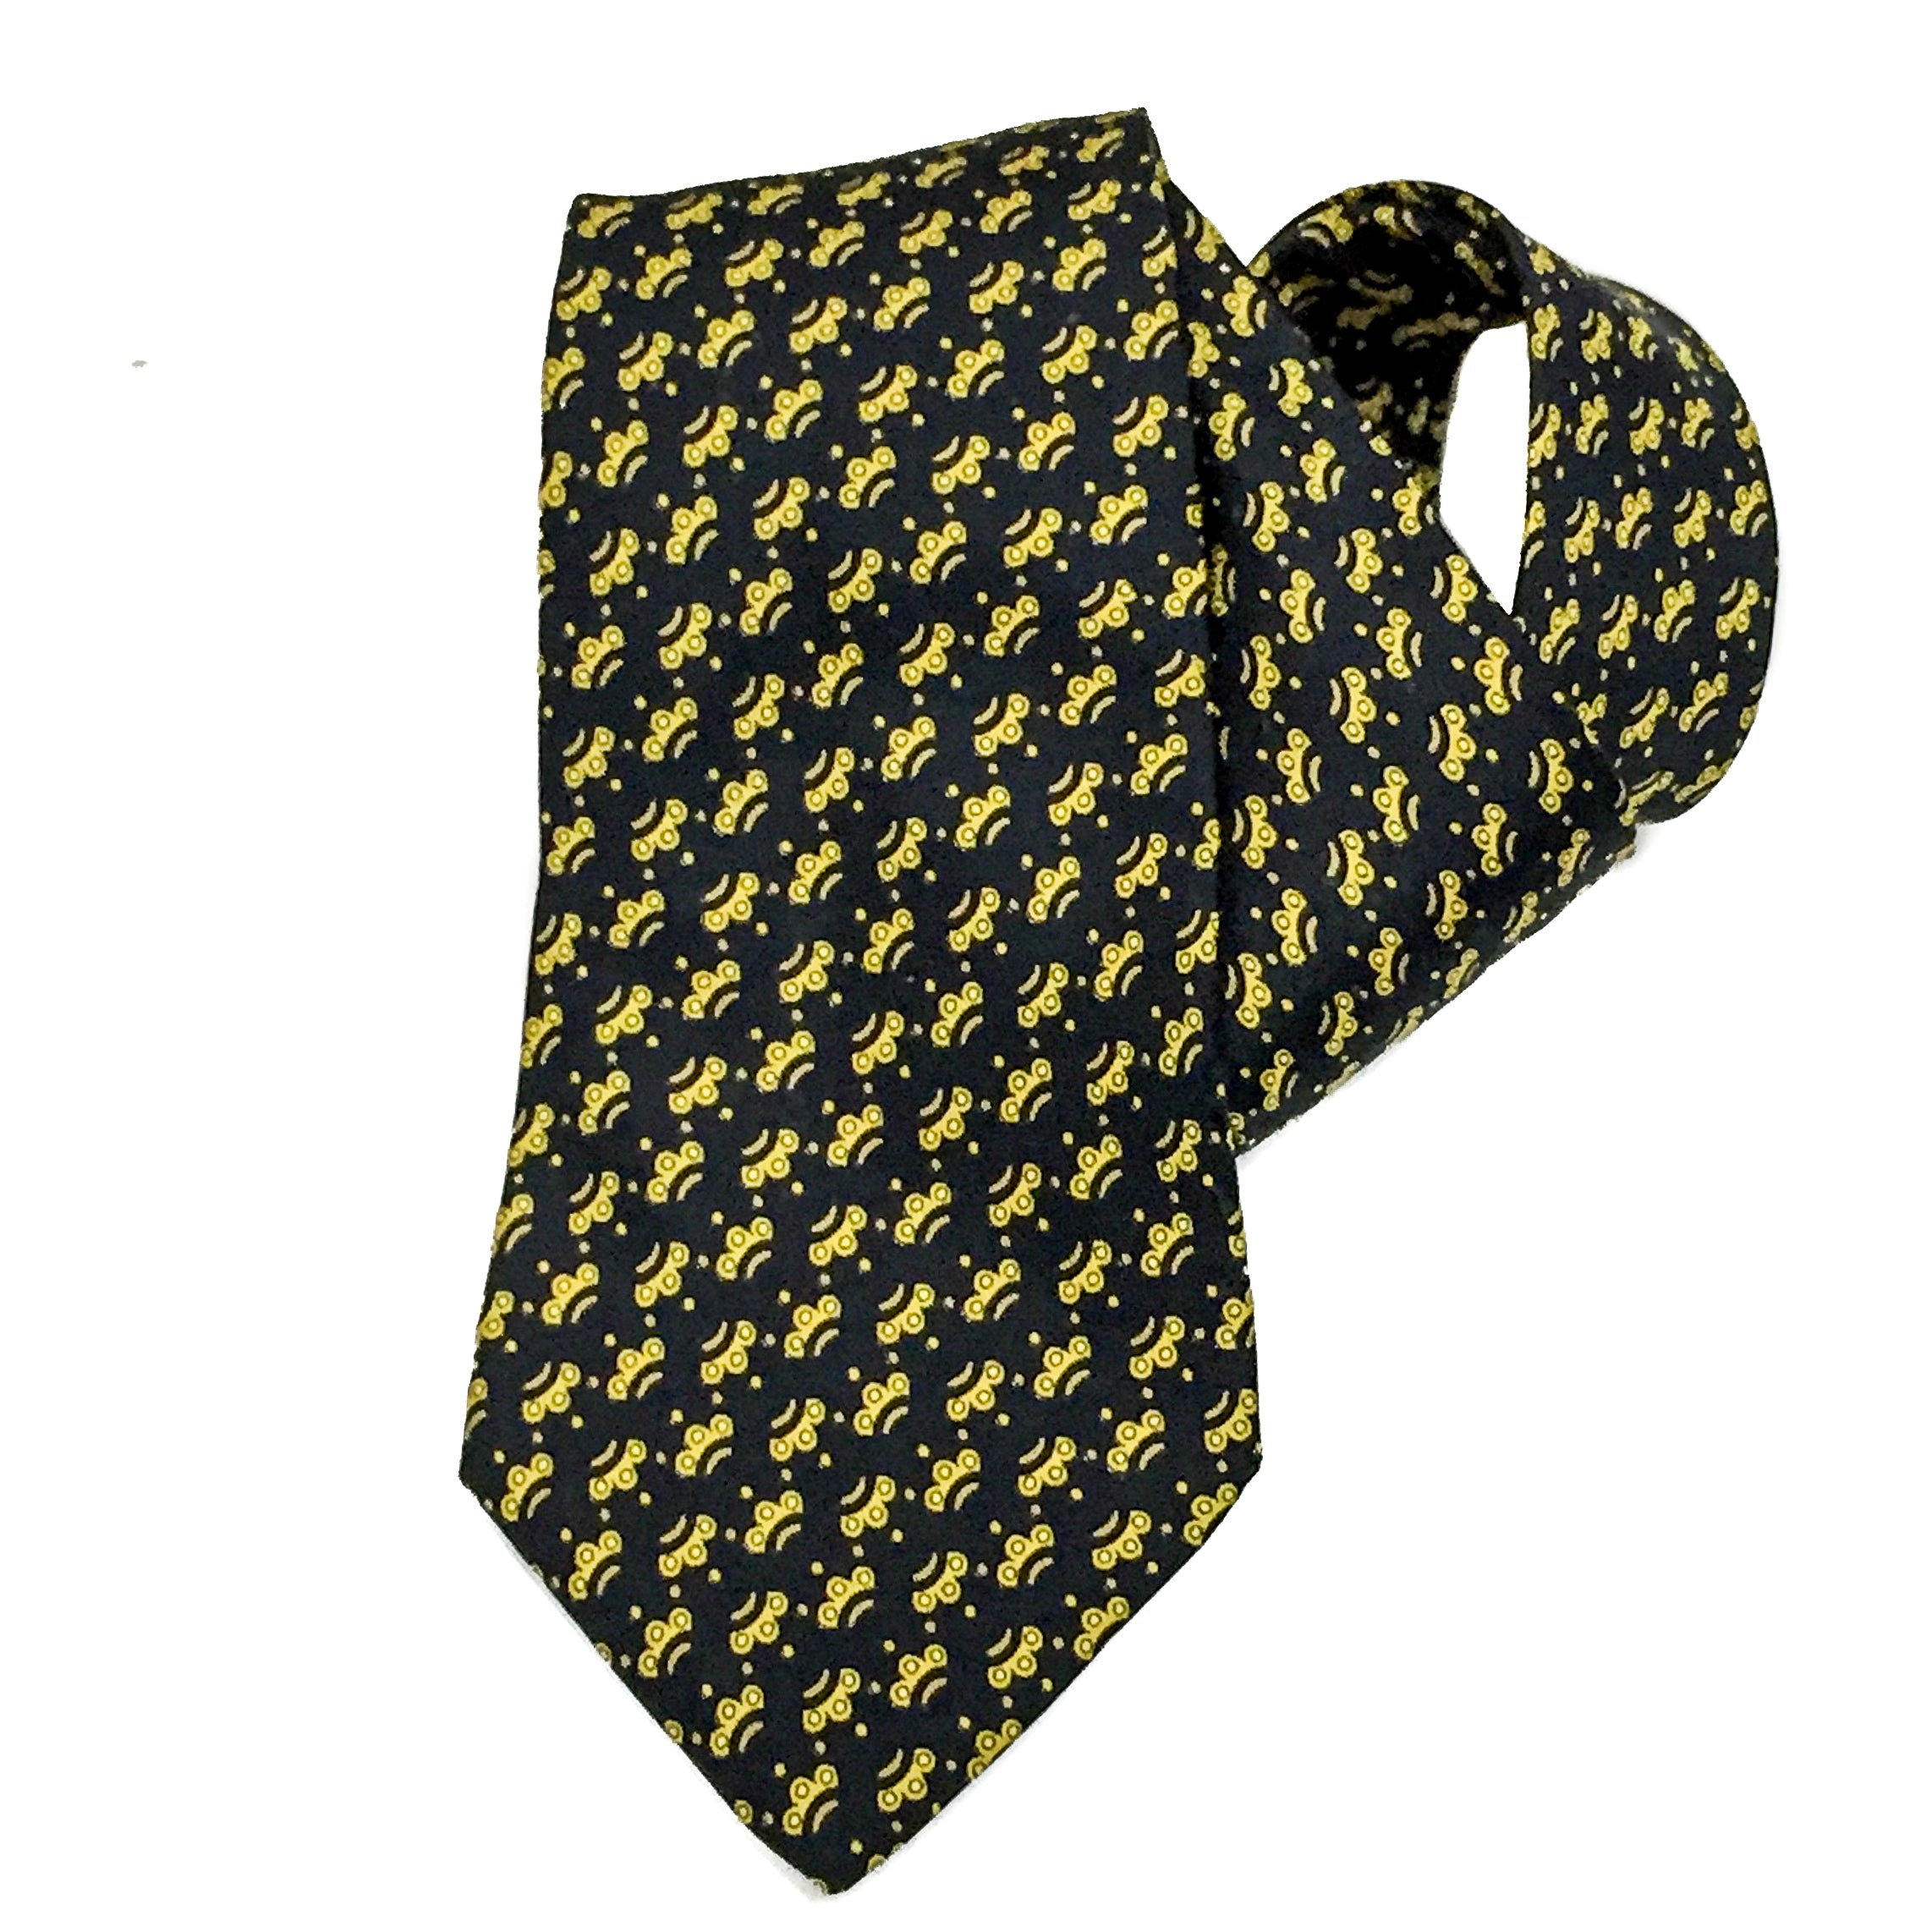 Hermes Silk Necktie 7386 PA Black and Gold